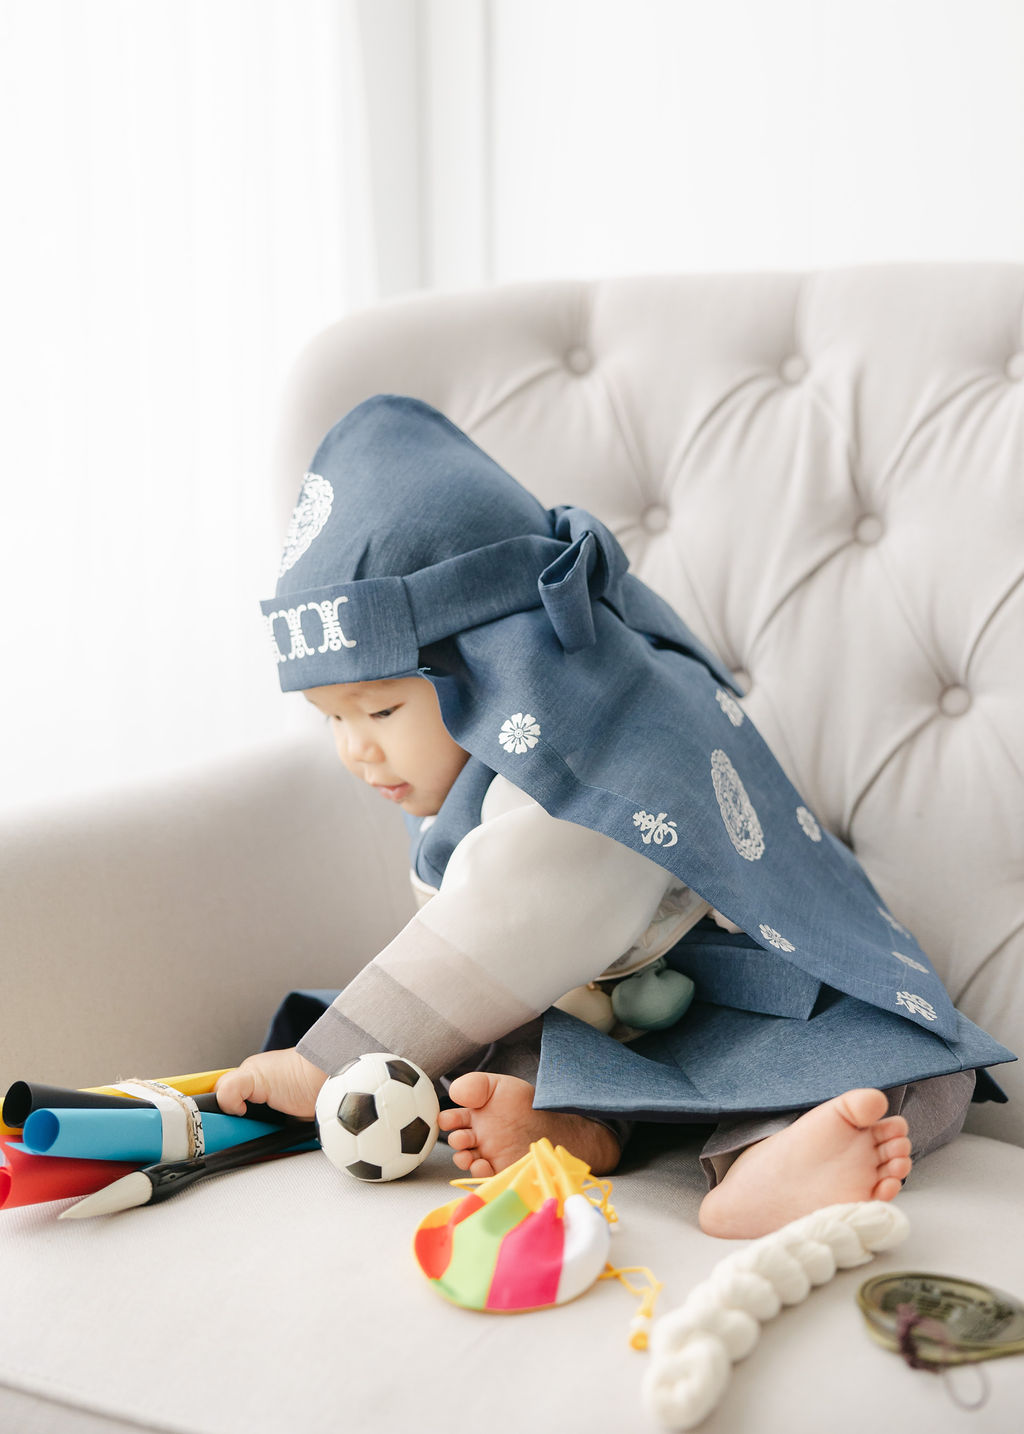 A toddler boy in a blue traditional outfit sits on a couch playing with some toys after meeting with indianapolis babysitters